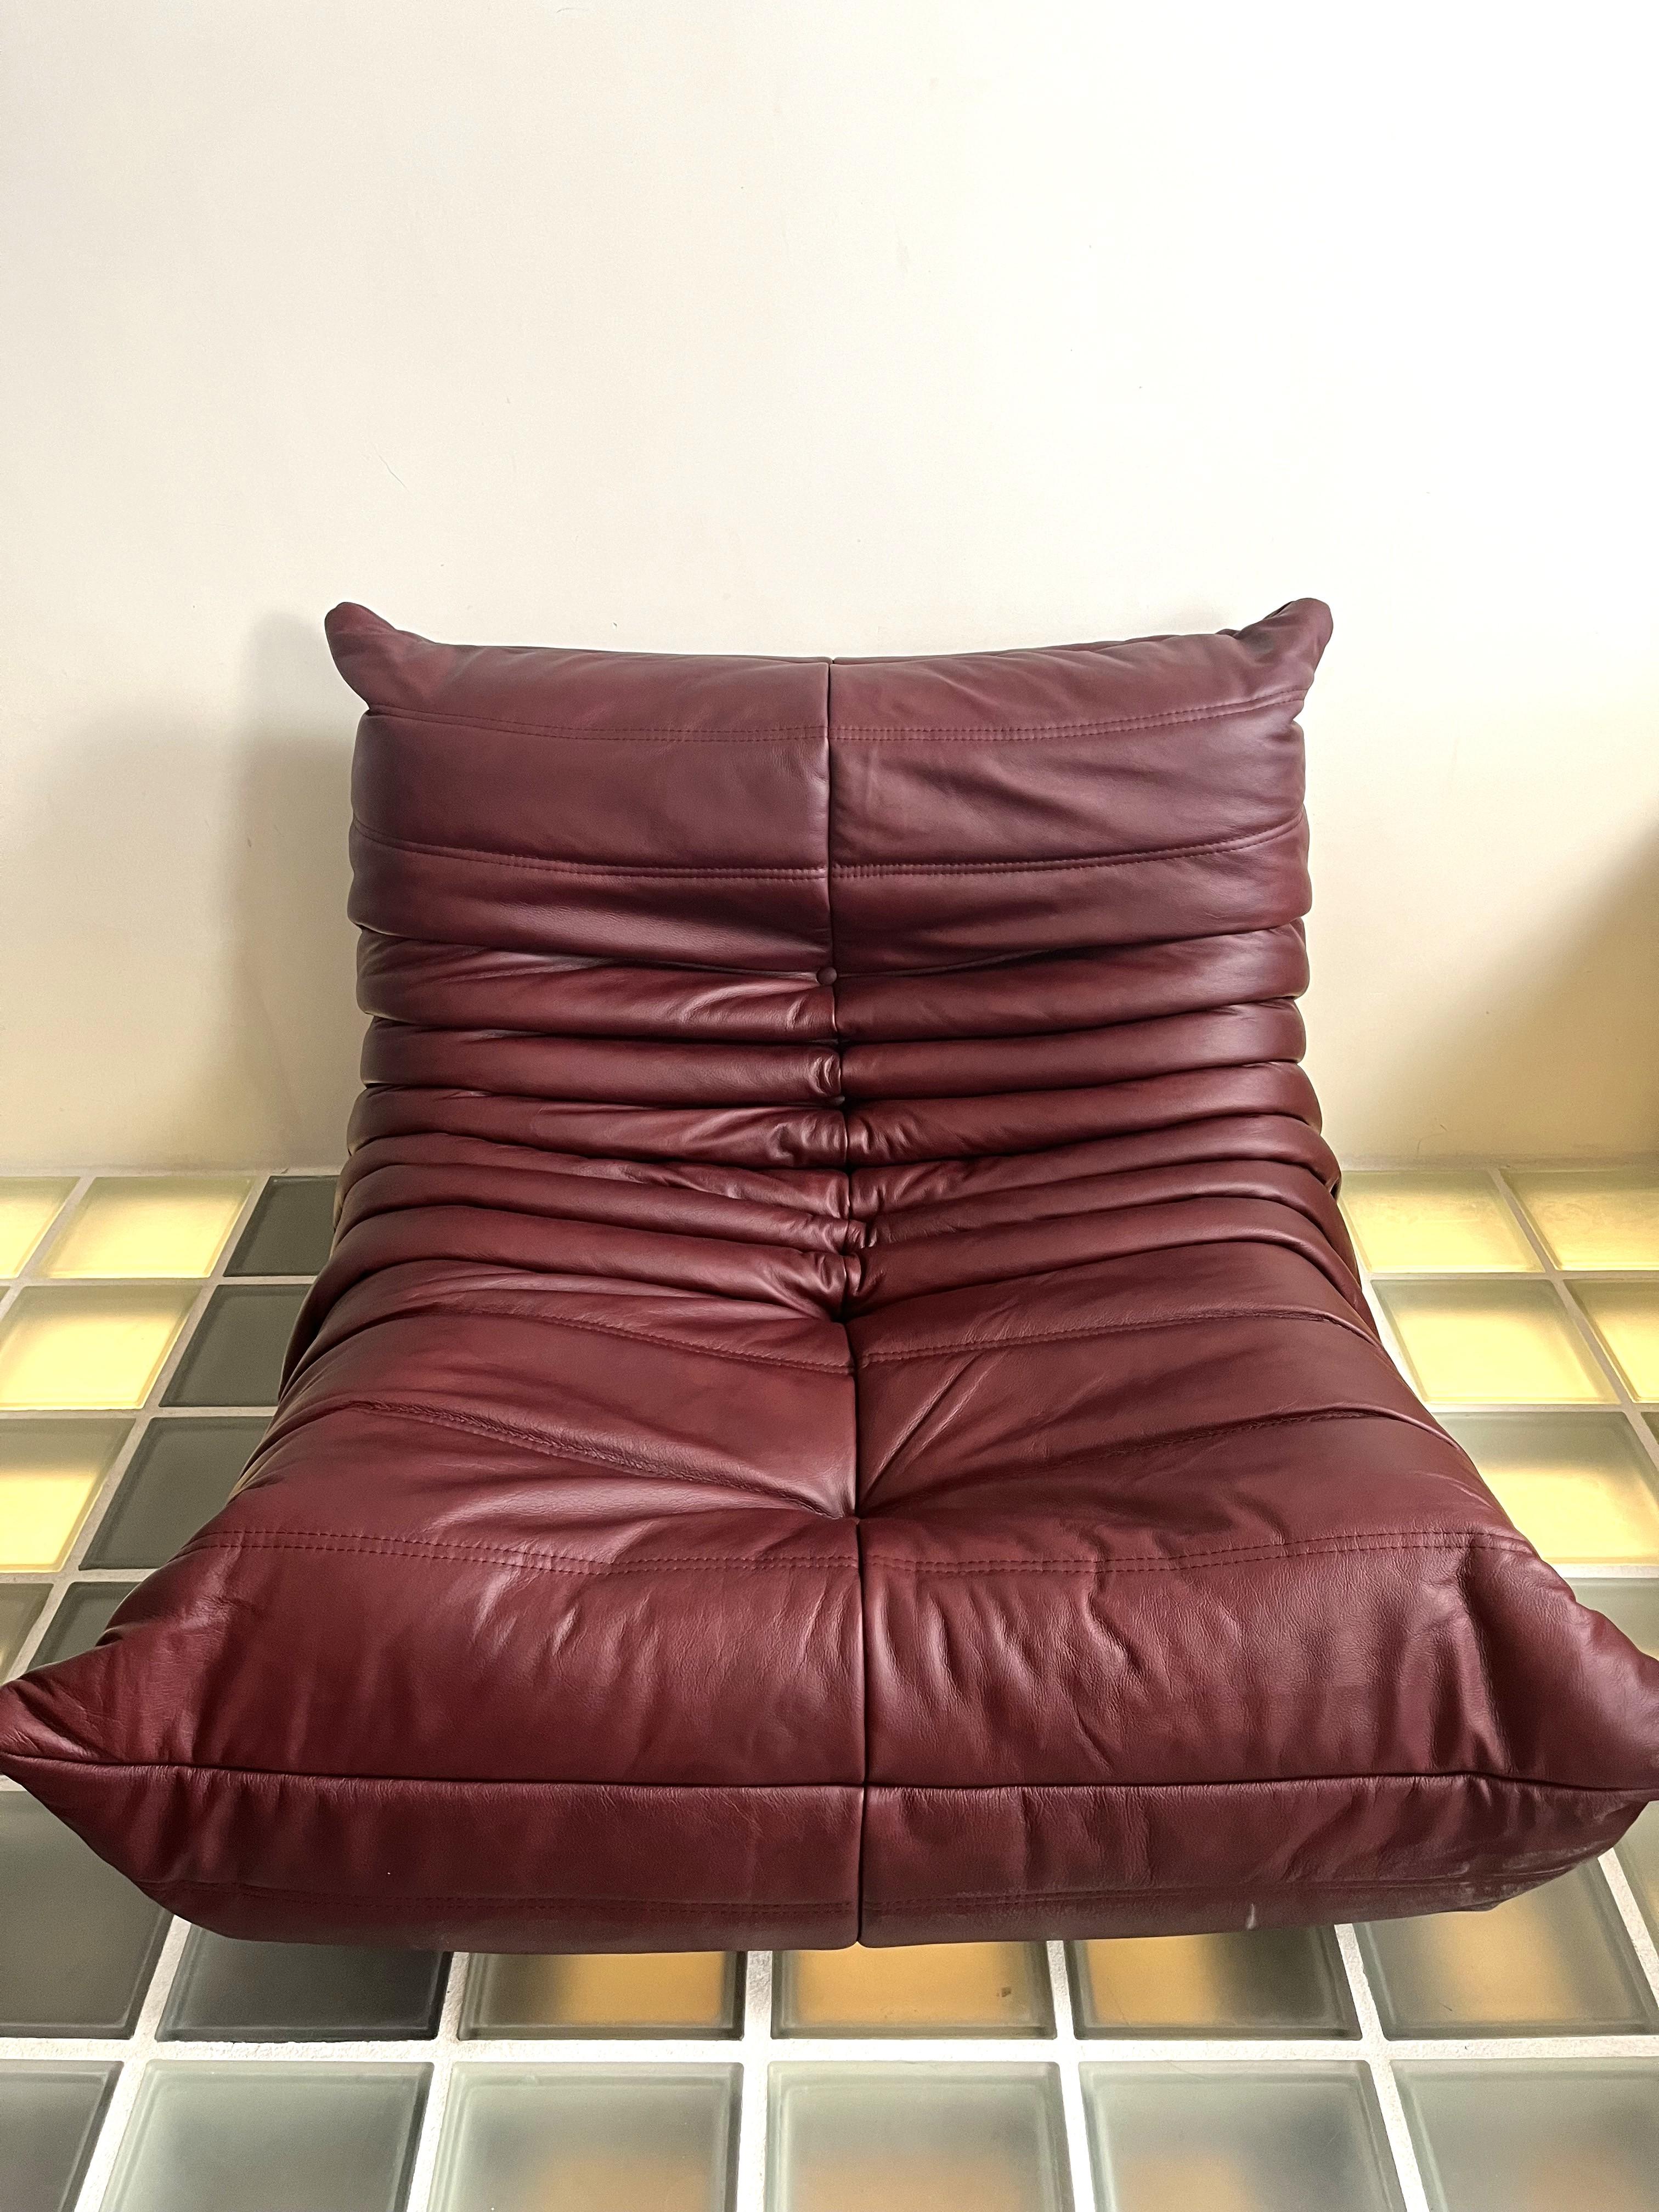 Togo Sofa, by Michel Ducaroy for Ligne Roset, 
Togo sofa in velvet by Michel Ducaroy for Ligne Roset
The designer was inspired by the tooth paste tube
Thi set is made of: 1 seater, 2 seater and corner
upholsted with bordoux leather